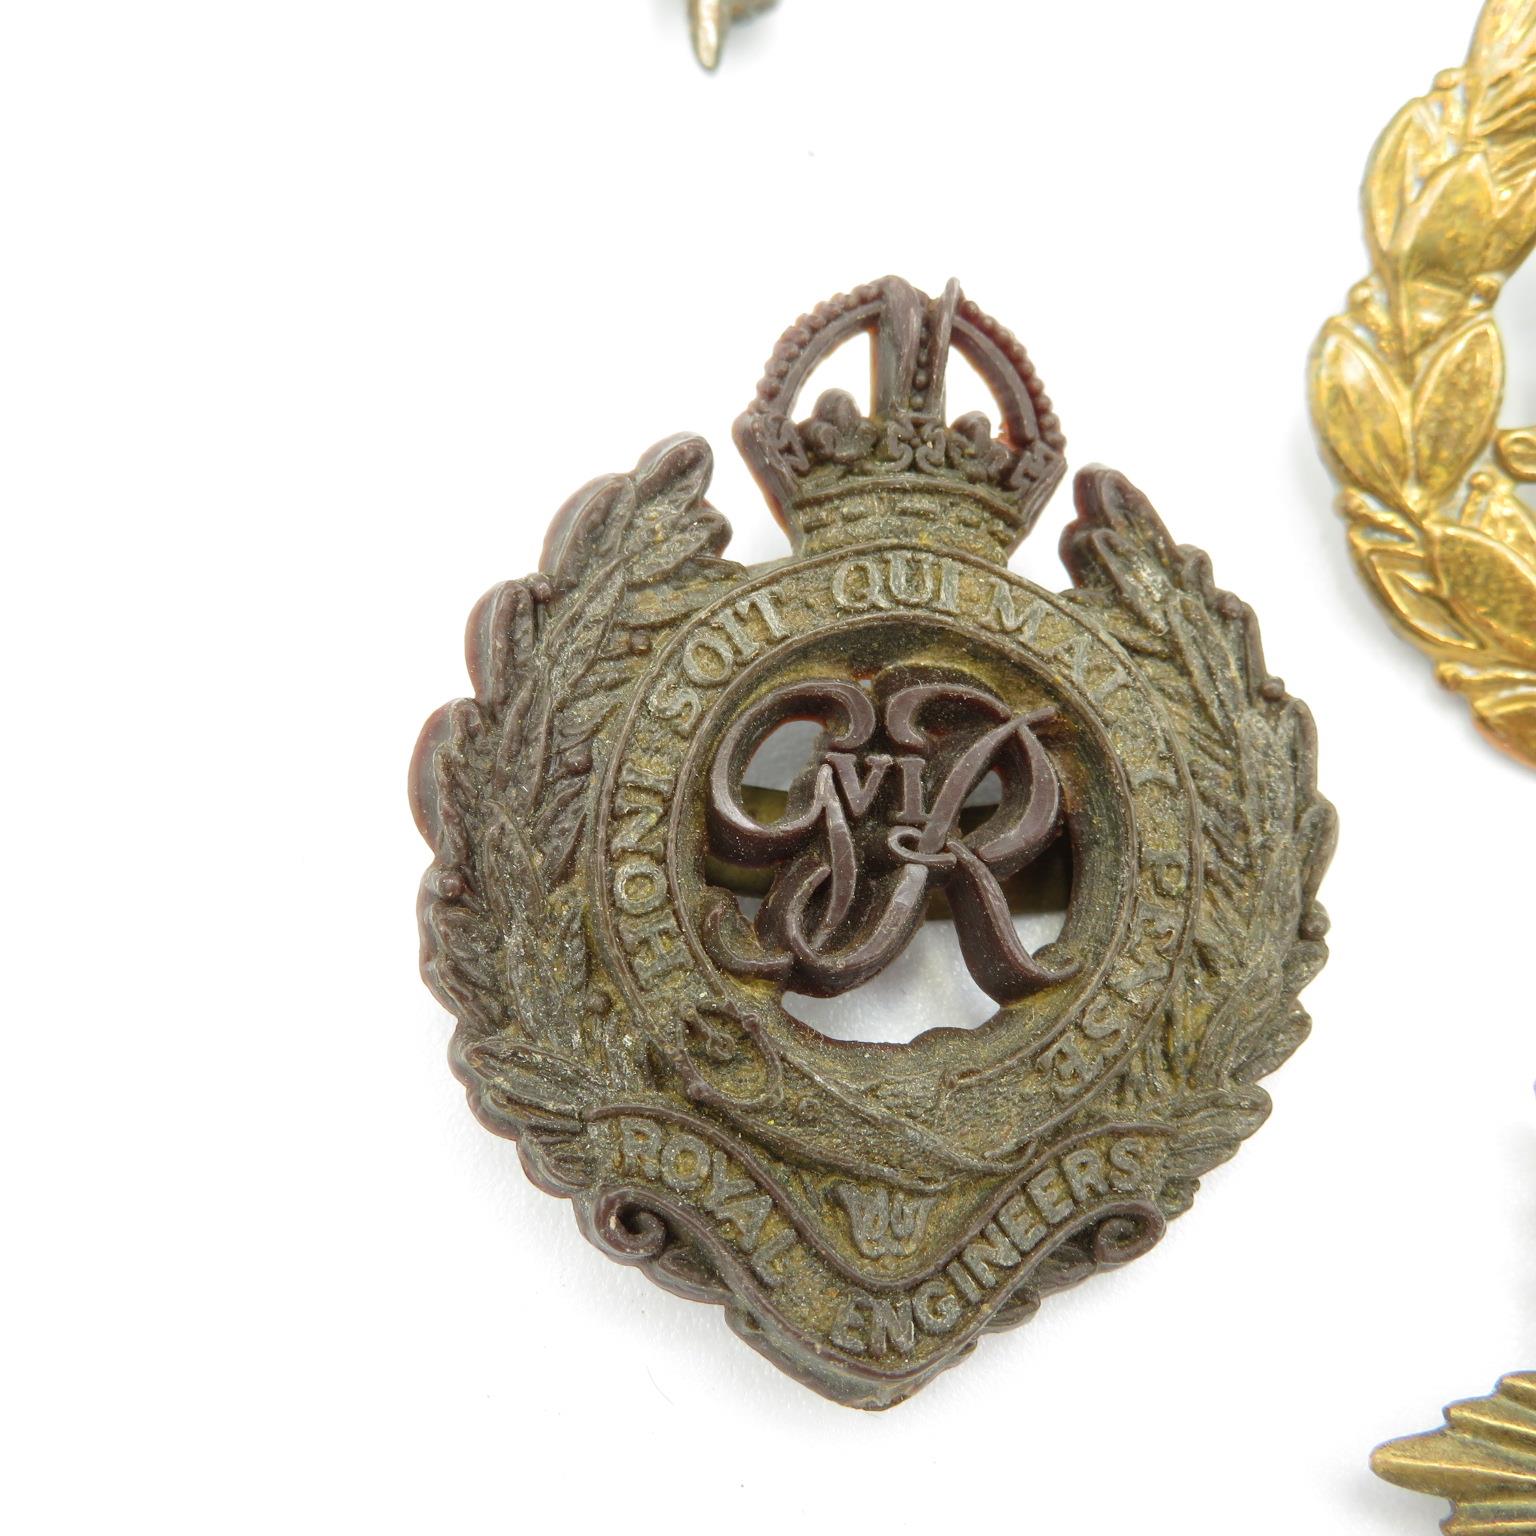 18x Military cap badges including Royal Scots Fusiliers and Lancers etc. - - Image 16 of 19